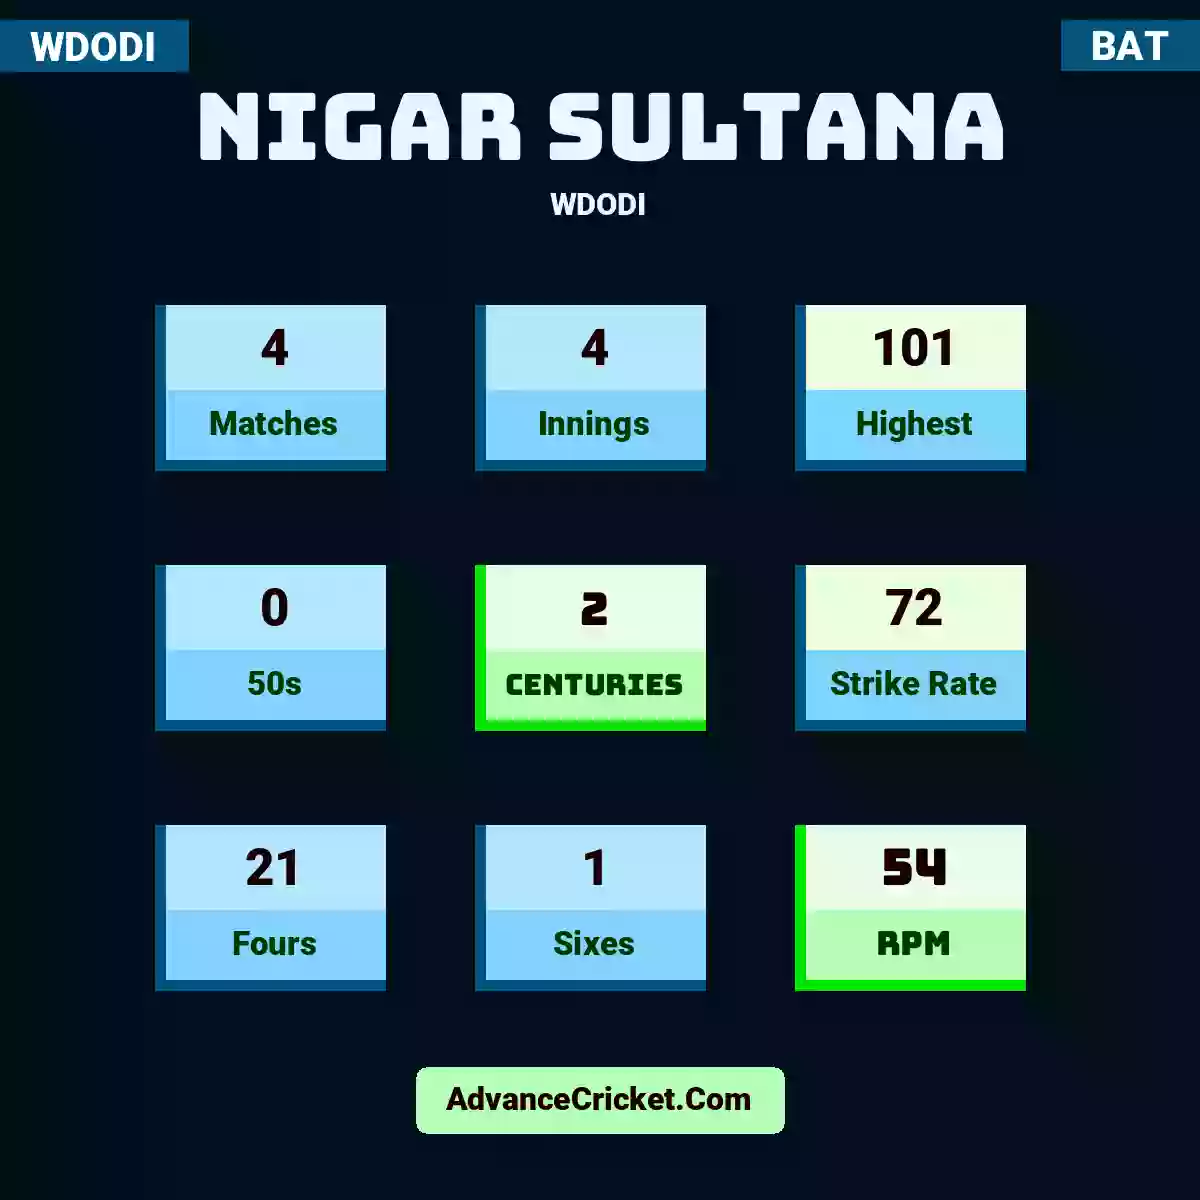 Nigar Sultana WDODI , Nigar Sultana played 4 matches, scored 101 runs as highest, 0 half-centuries, and 2 centuries, with a strike rate of 72. N.Sultana hit 21 fours and 1 sixes, with an RPM of 54.